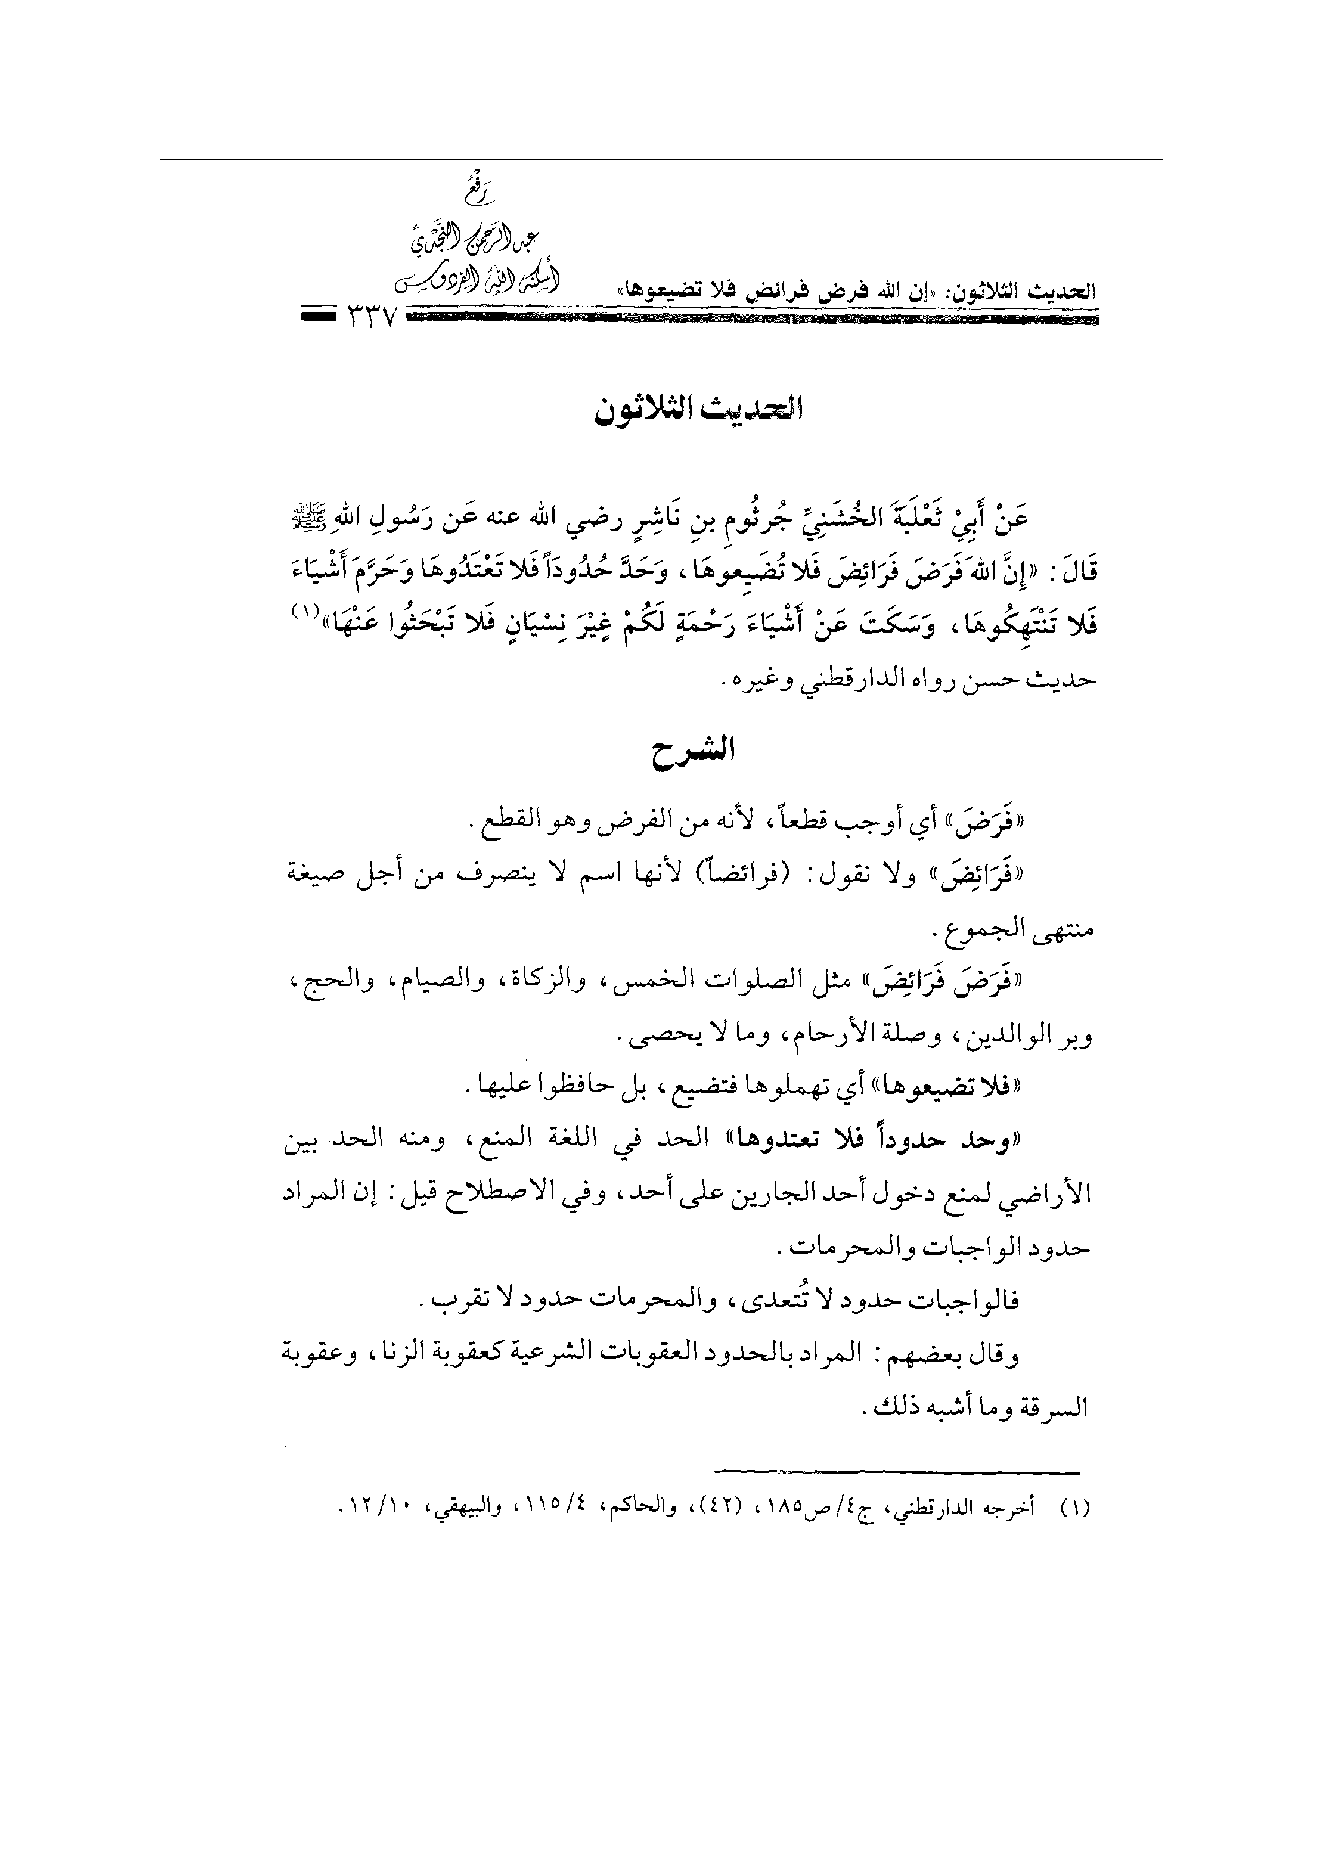 Page 337